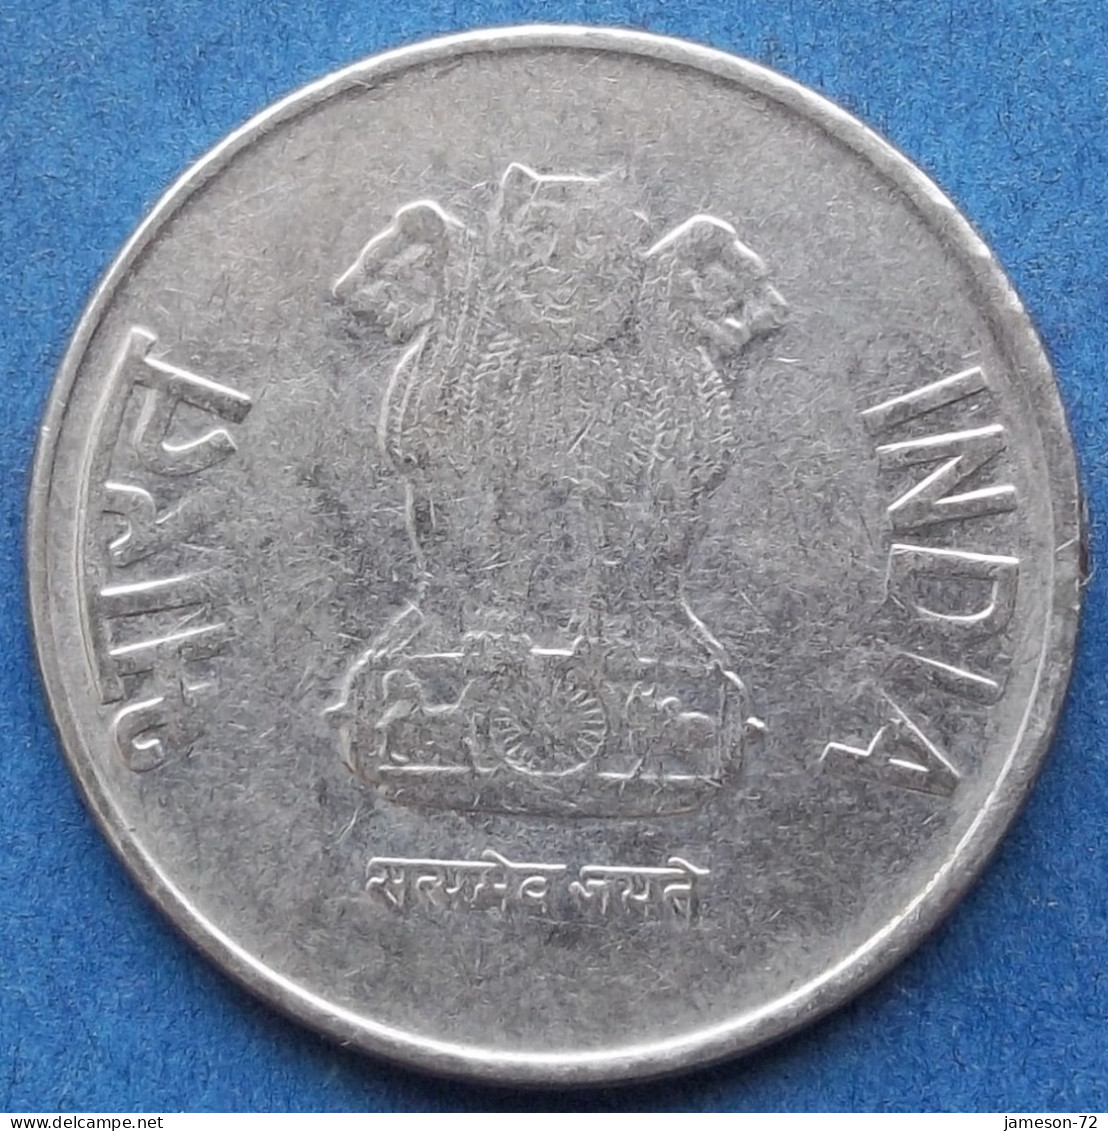 INDIA - 2 Rupees 2012 "Lotus Flowers" KM# 395 Republic Decimal Coinage (1957) - Edelweiss Coins - Georgien